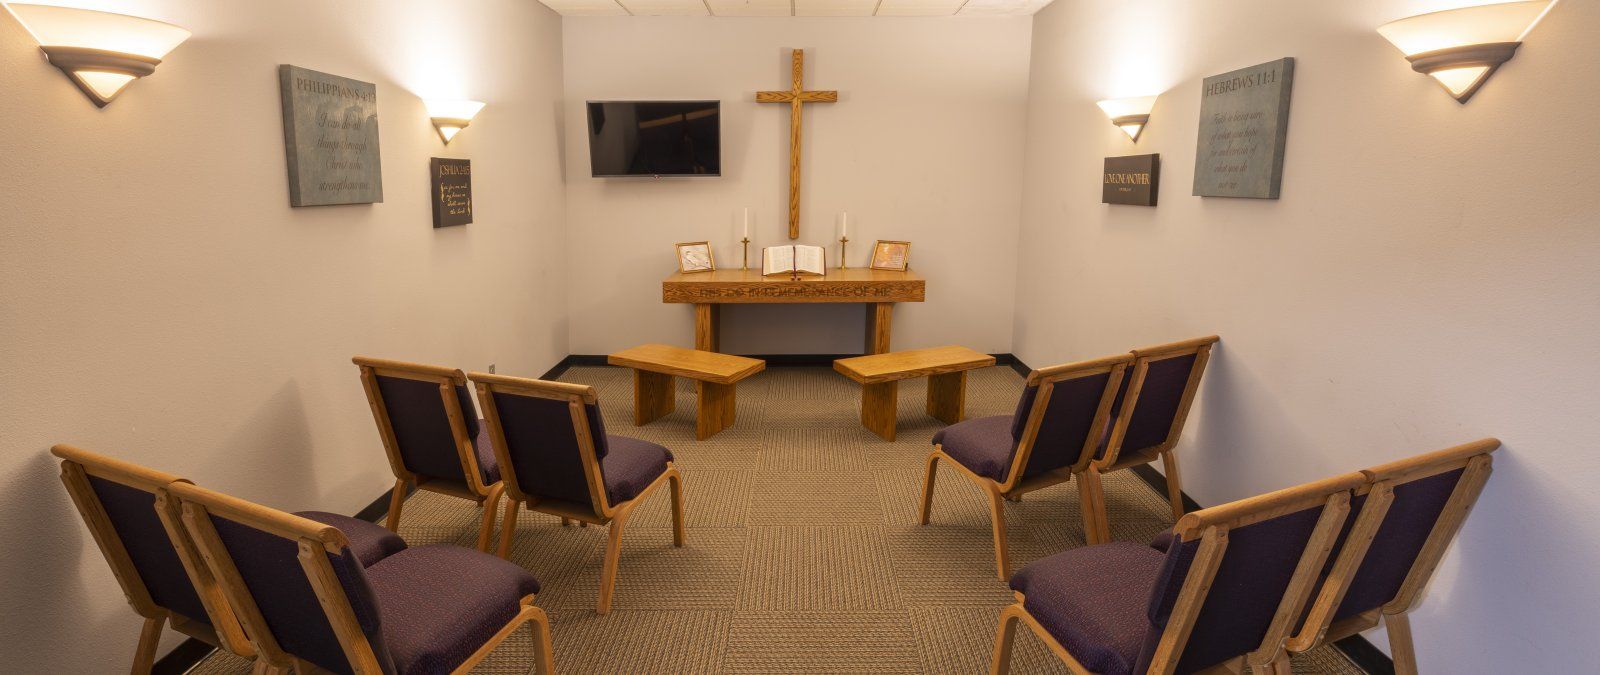 Chapel room with chairs, benches and an alter